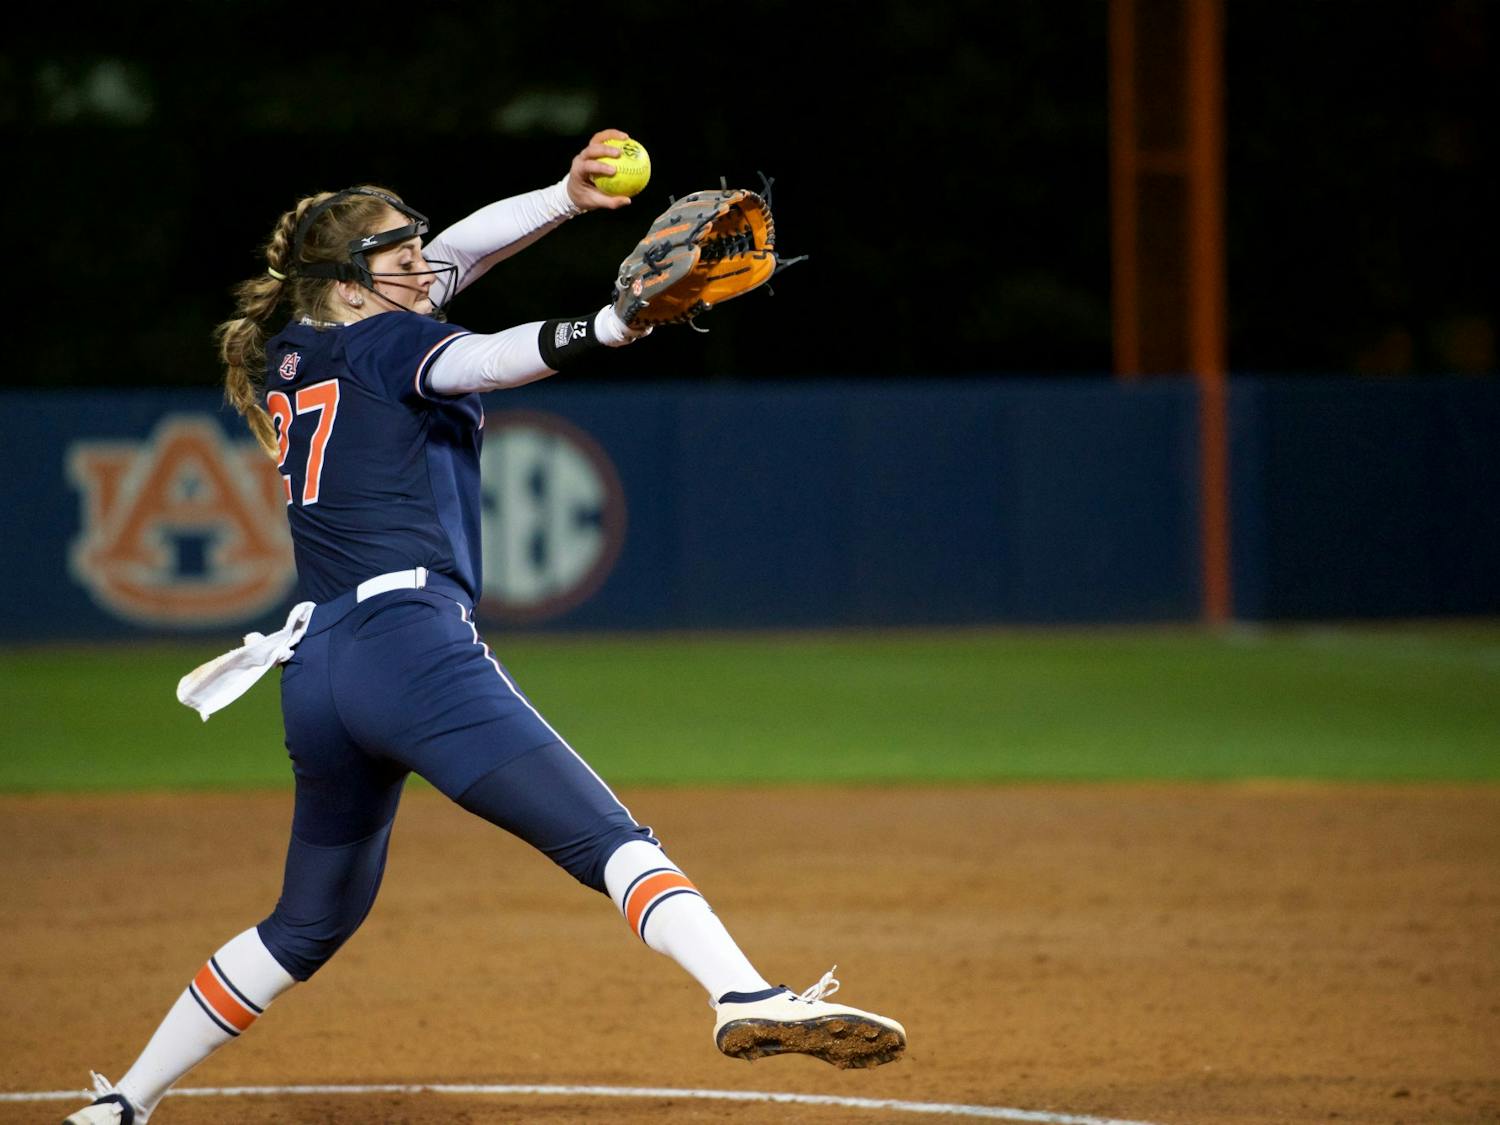 Lexie Handley pitches in Auburn Softball's win vs. Alabama State on February 14